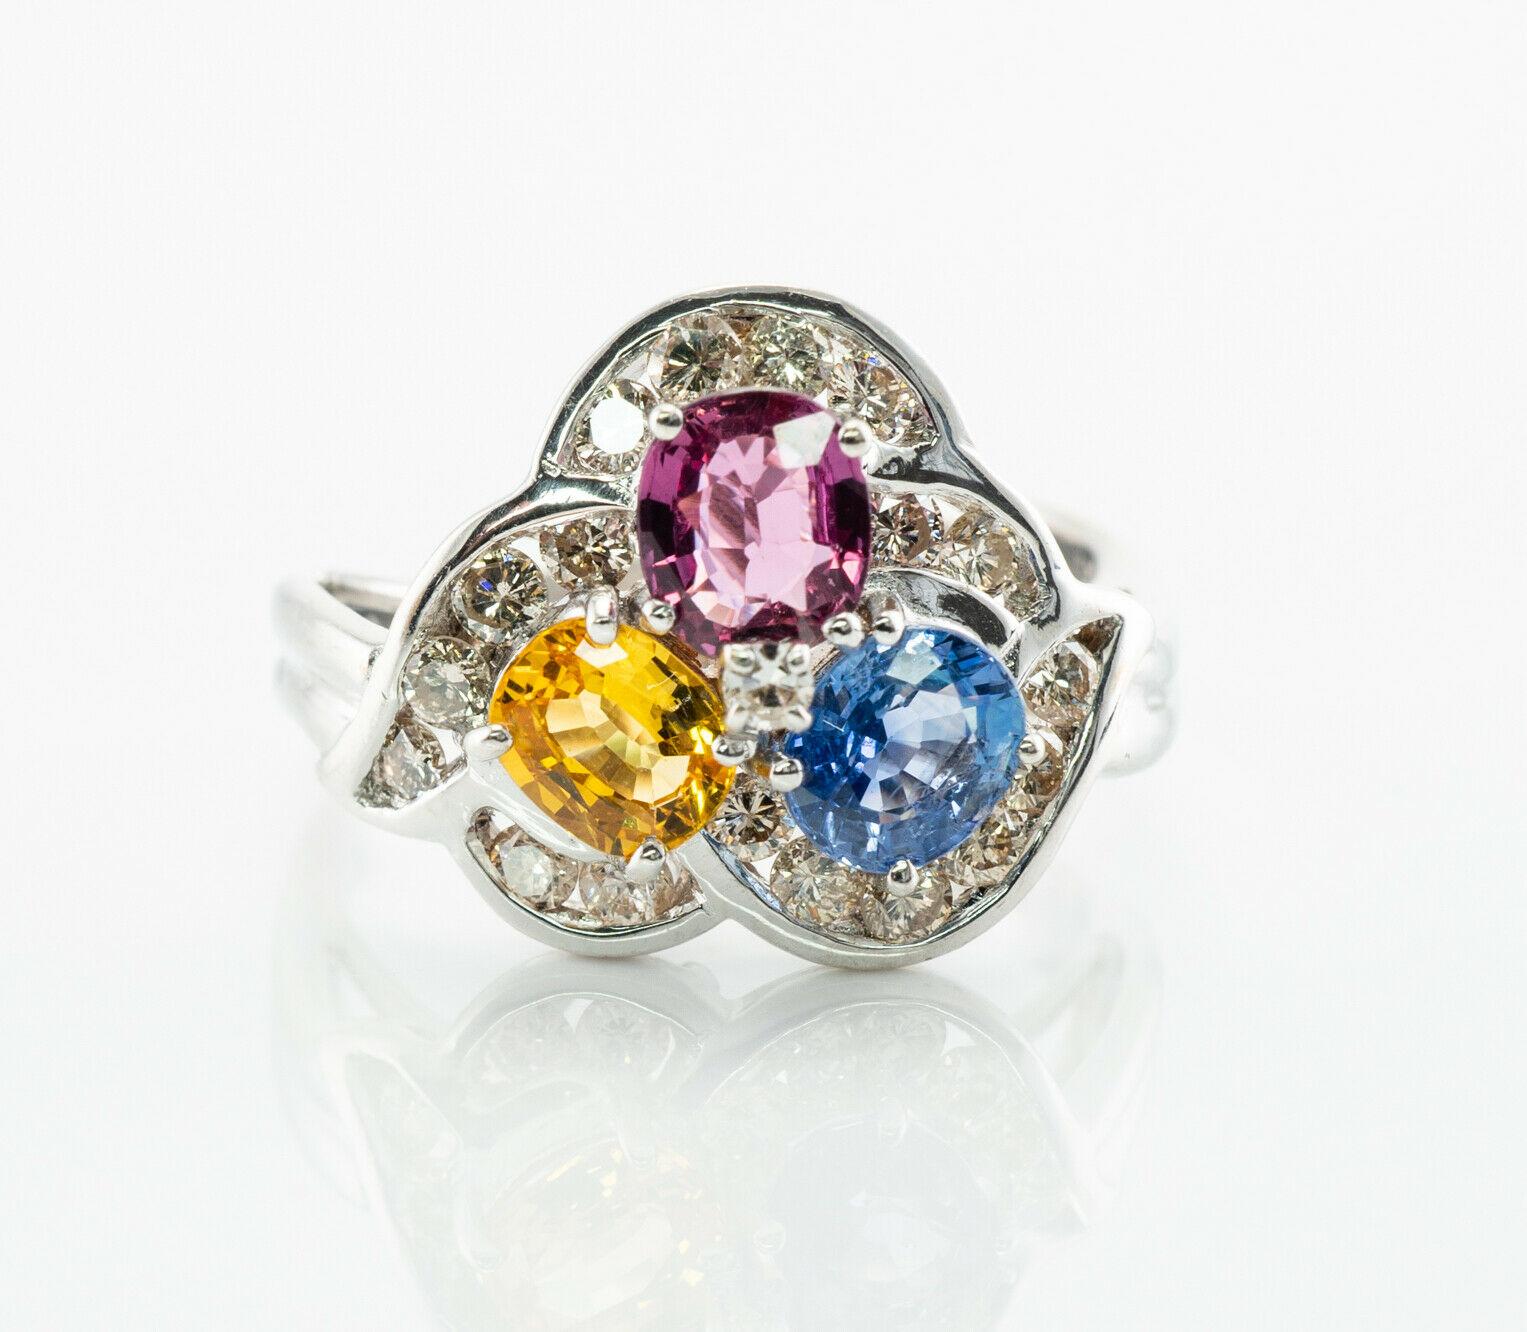 This gorgeous estate ring is finely crafted in solid 14K White Gold and set with genuine Earth mined Sapphires: blue, pink, and yellow gems. Each oval cut stone measures 5mm x 4mm totaling 1.35 carats. These amazing gems are so clean, clear, and